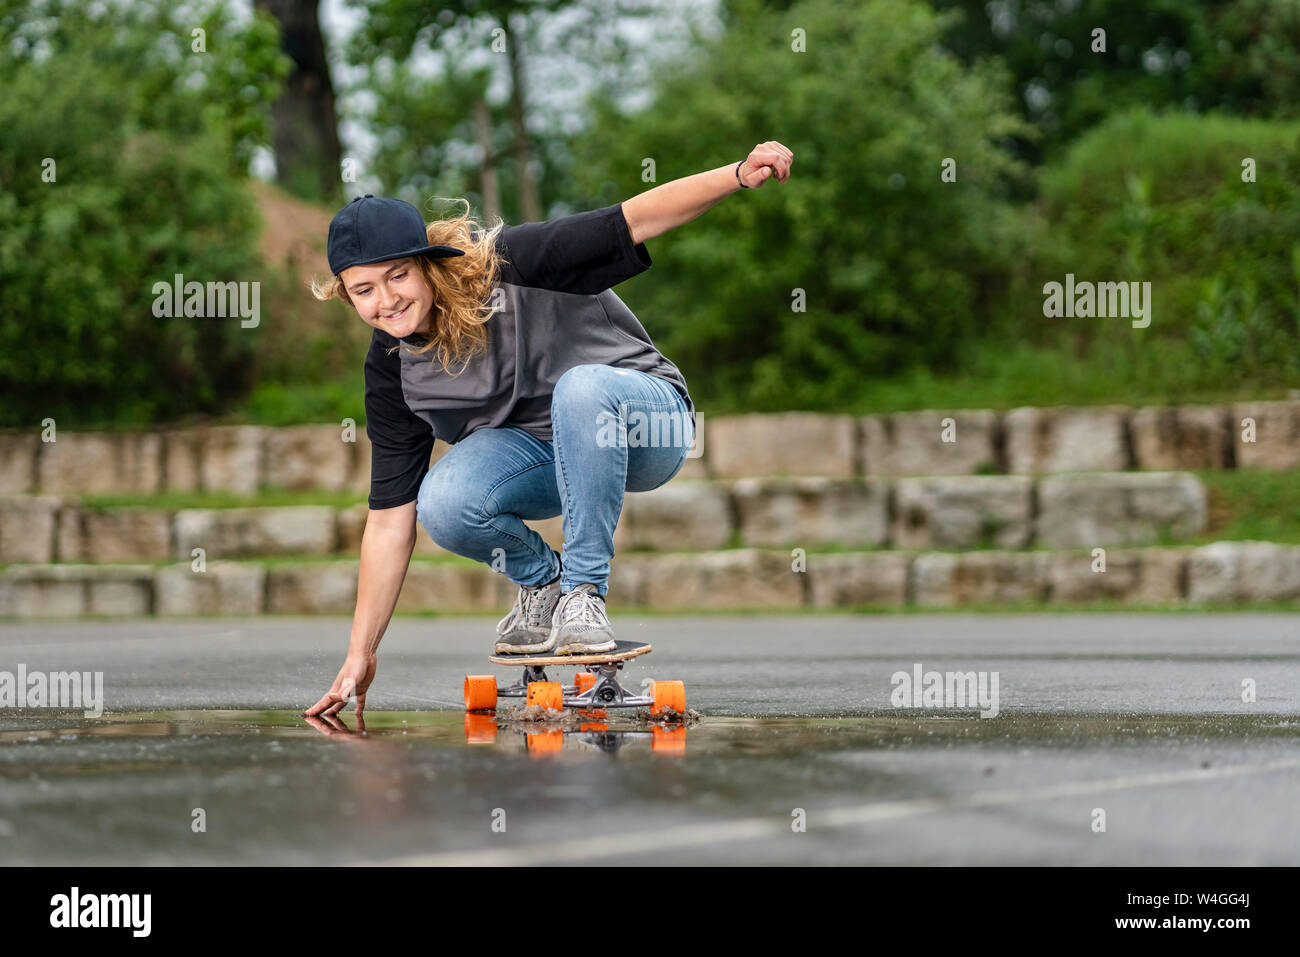 Young woman balancing on skateboard Banque D'Images